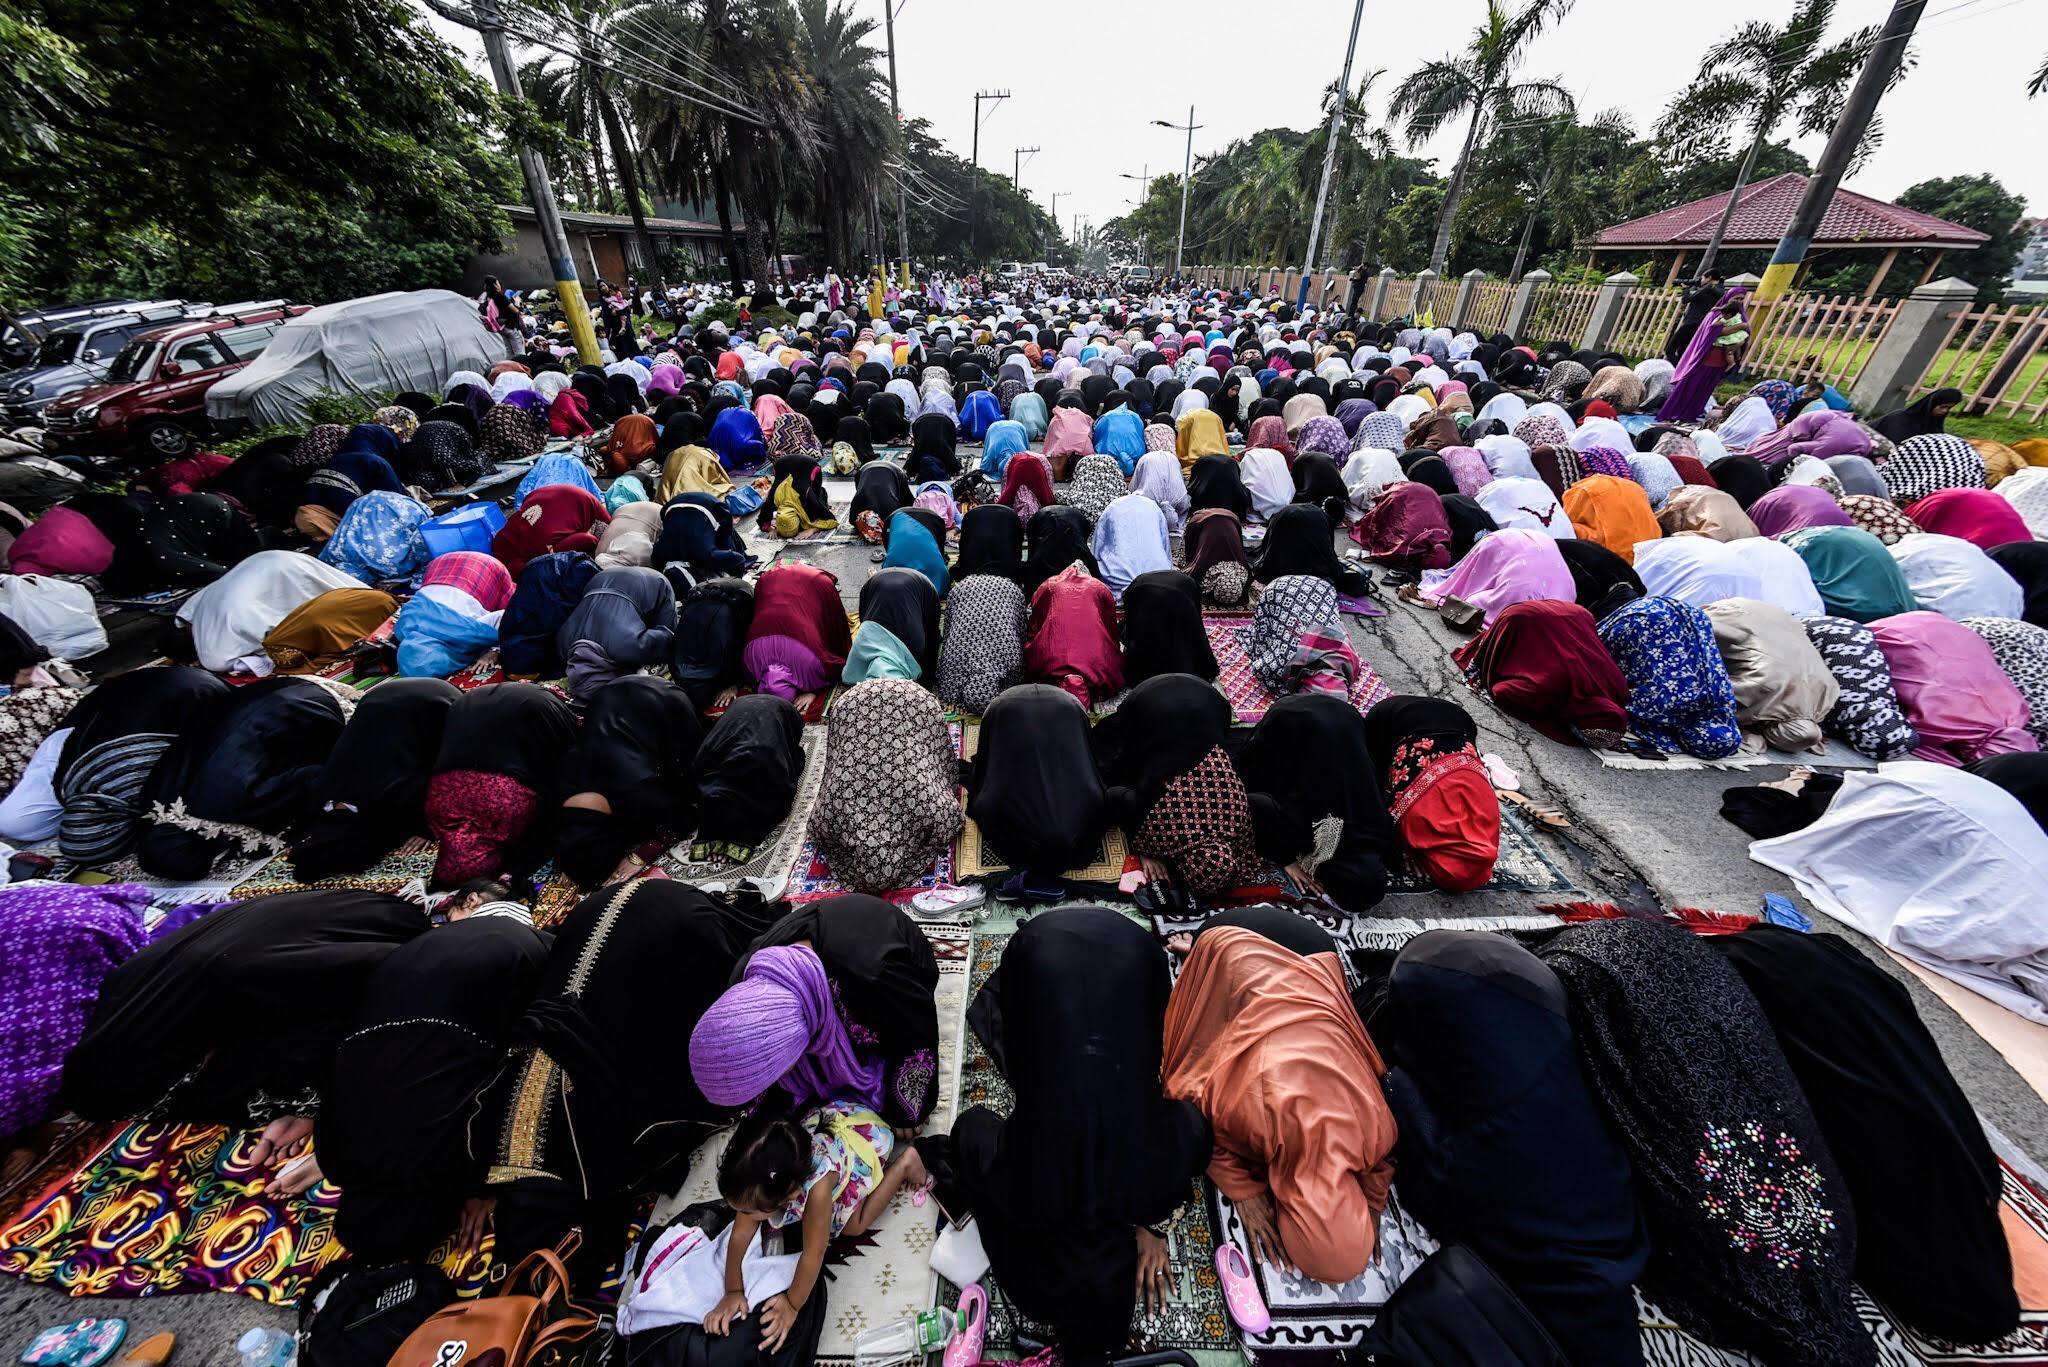 IN PRAYER. Muslims in Taguig pray during the Eid'l Adha celebration on August 21, 2018. Photo by Maria Tan/Rappler  